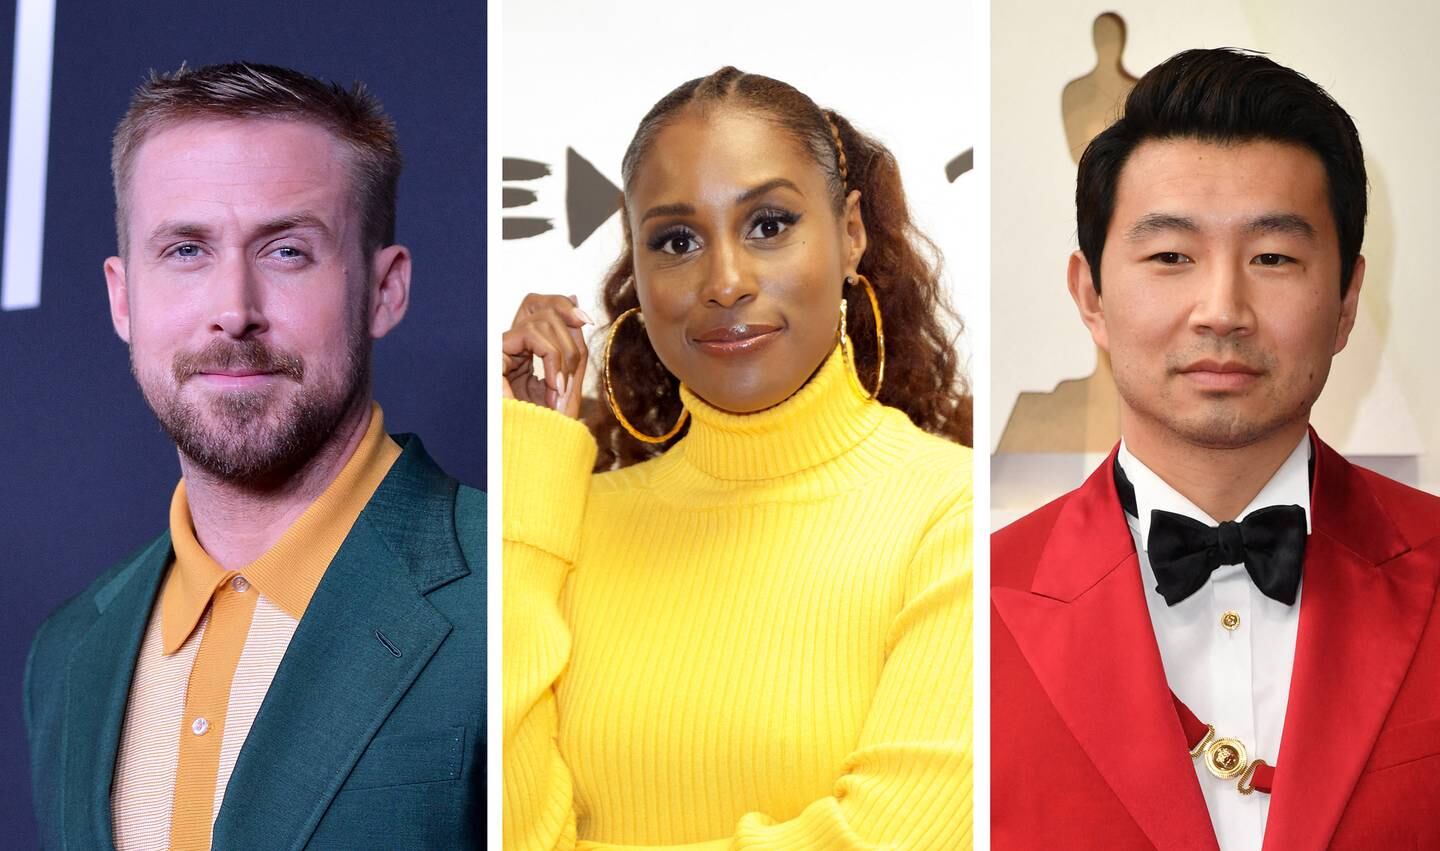 From left: Ryan Gosling will play Barbie's boyfriend, Ken, while Issa Rae and Simu Liu's characters are currently being kept under wraps. Photos: AFP